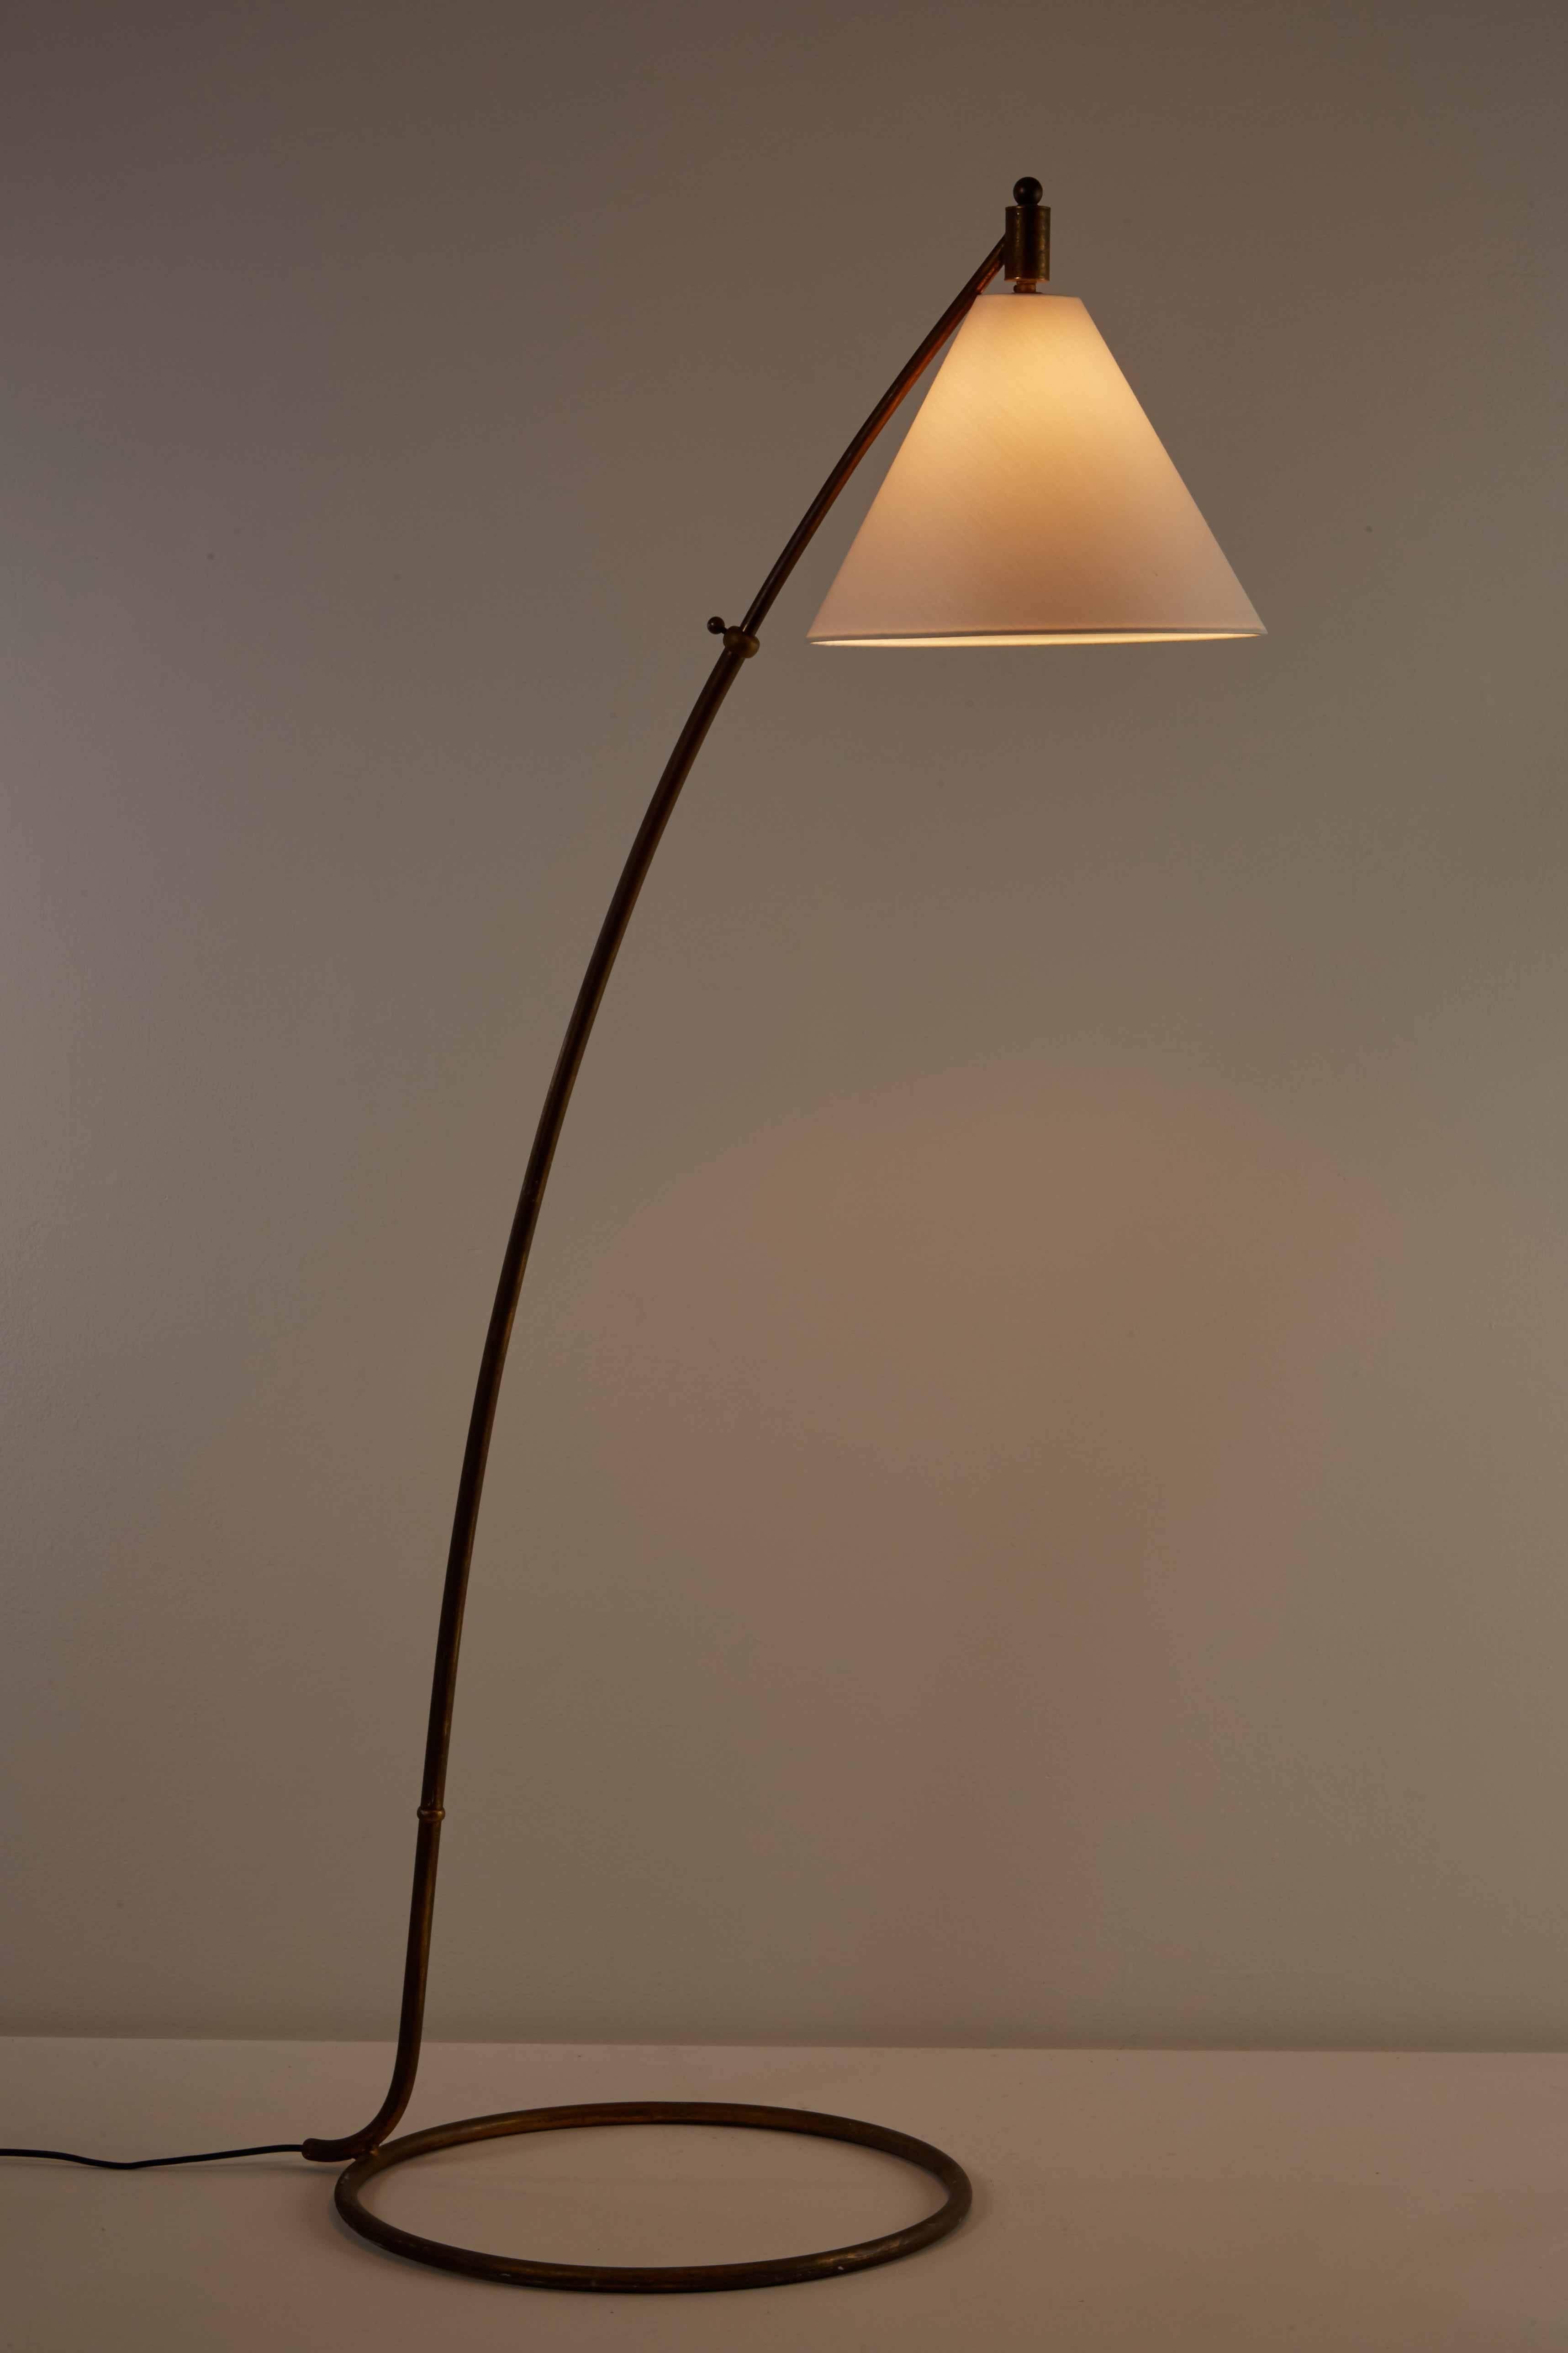 Floor lamp with brass base and custom silk shade designed in Italy, circa 1950s. Original cord. Takes one E27 75w maximum bulb.